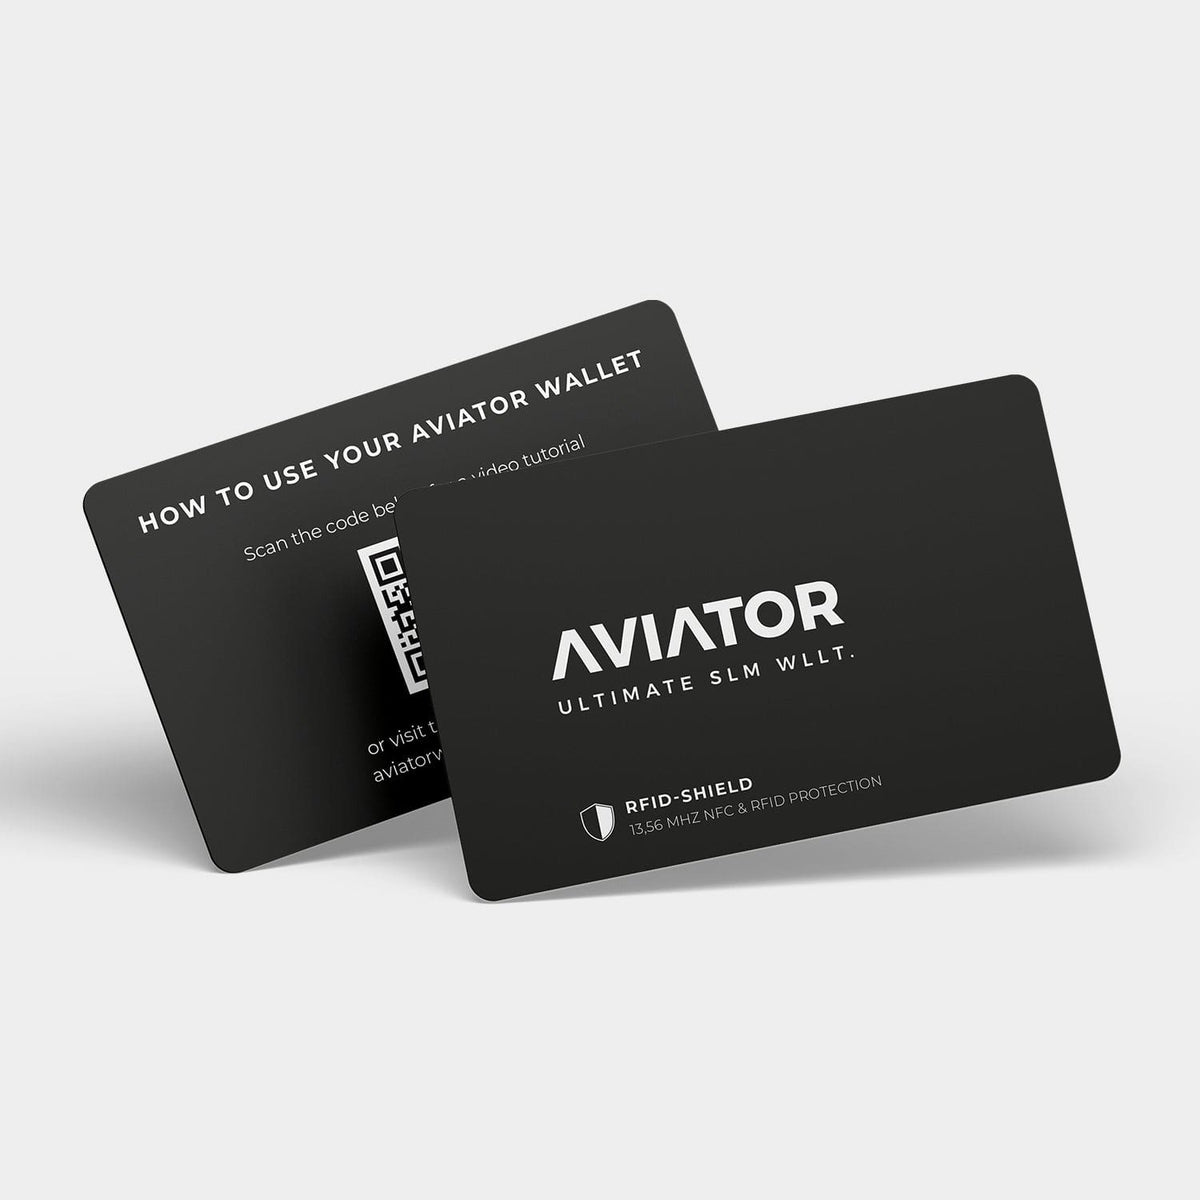 RFID BLOCKER PROTECTION CARD - AVIATOR by EVERMADE WALLETS